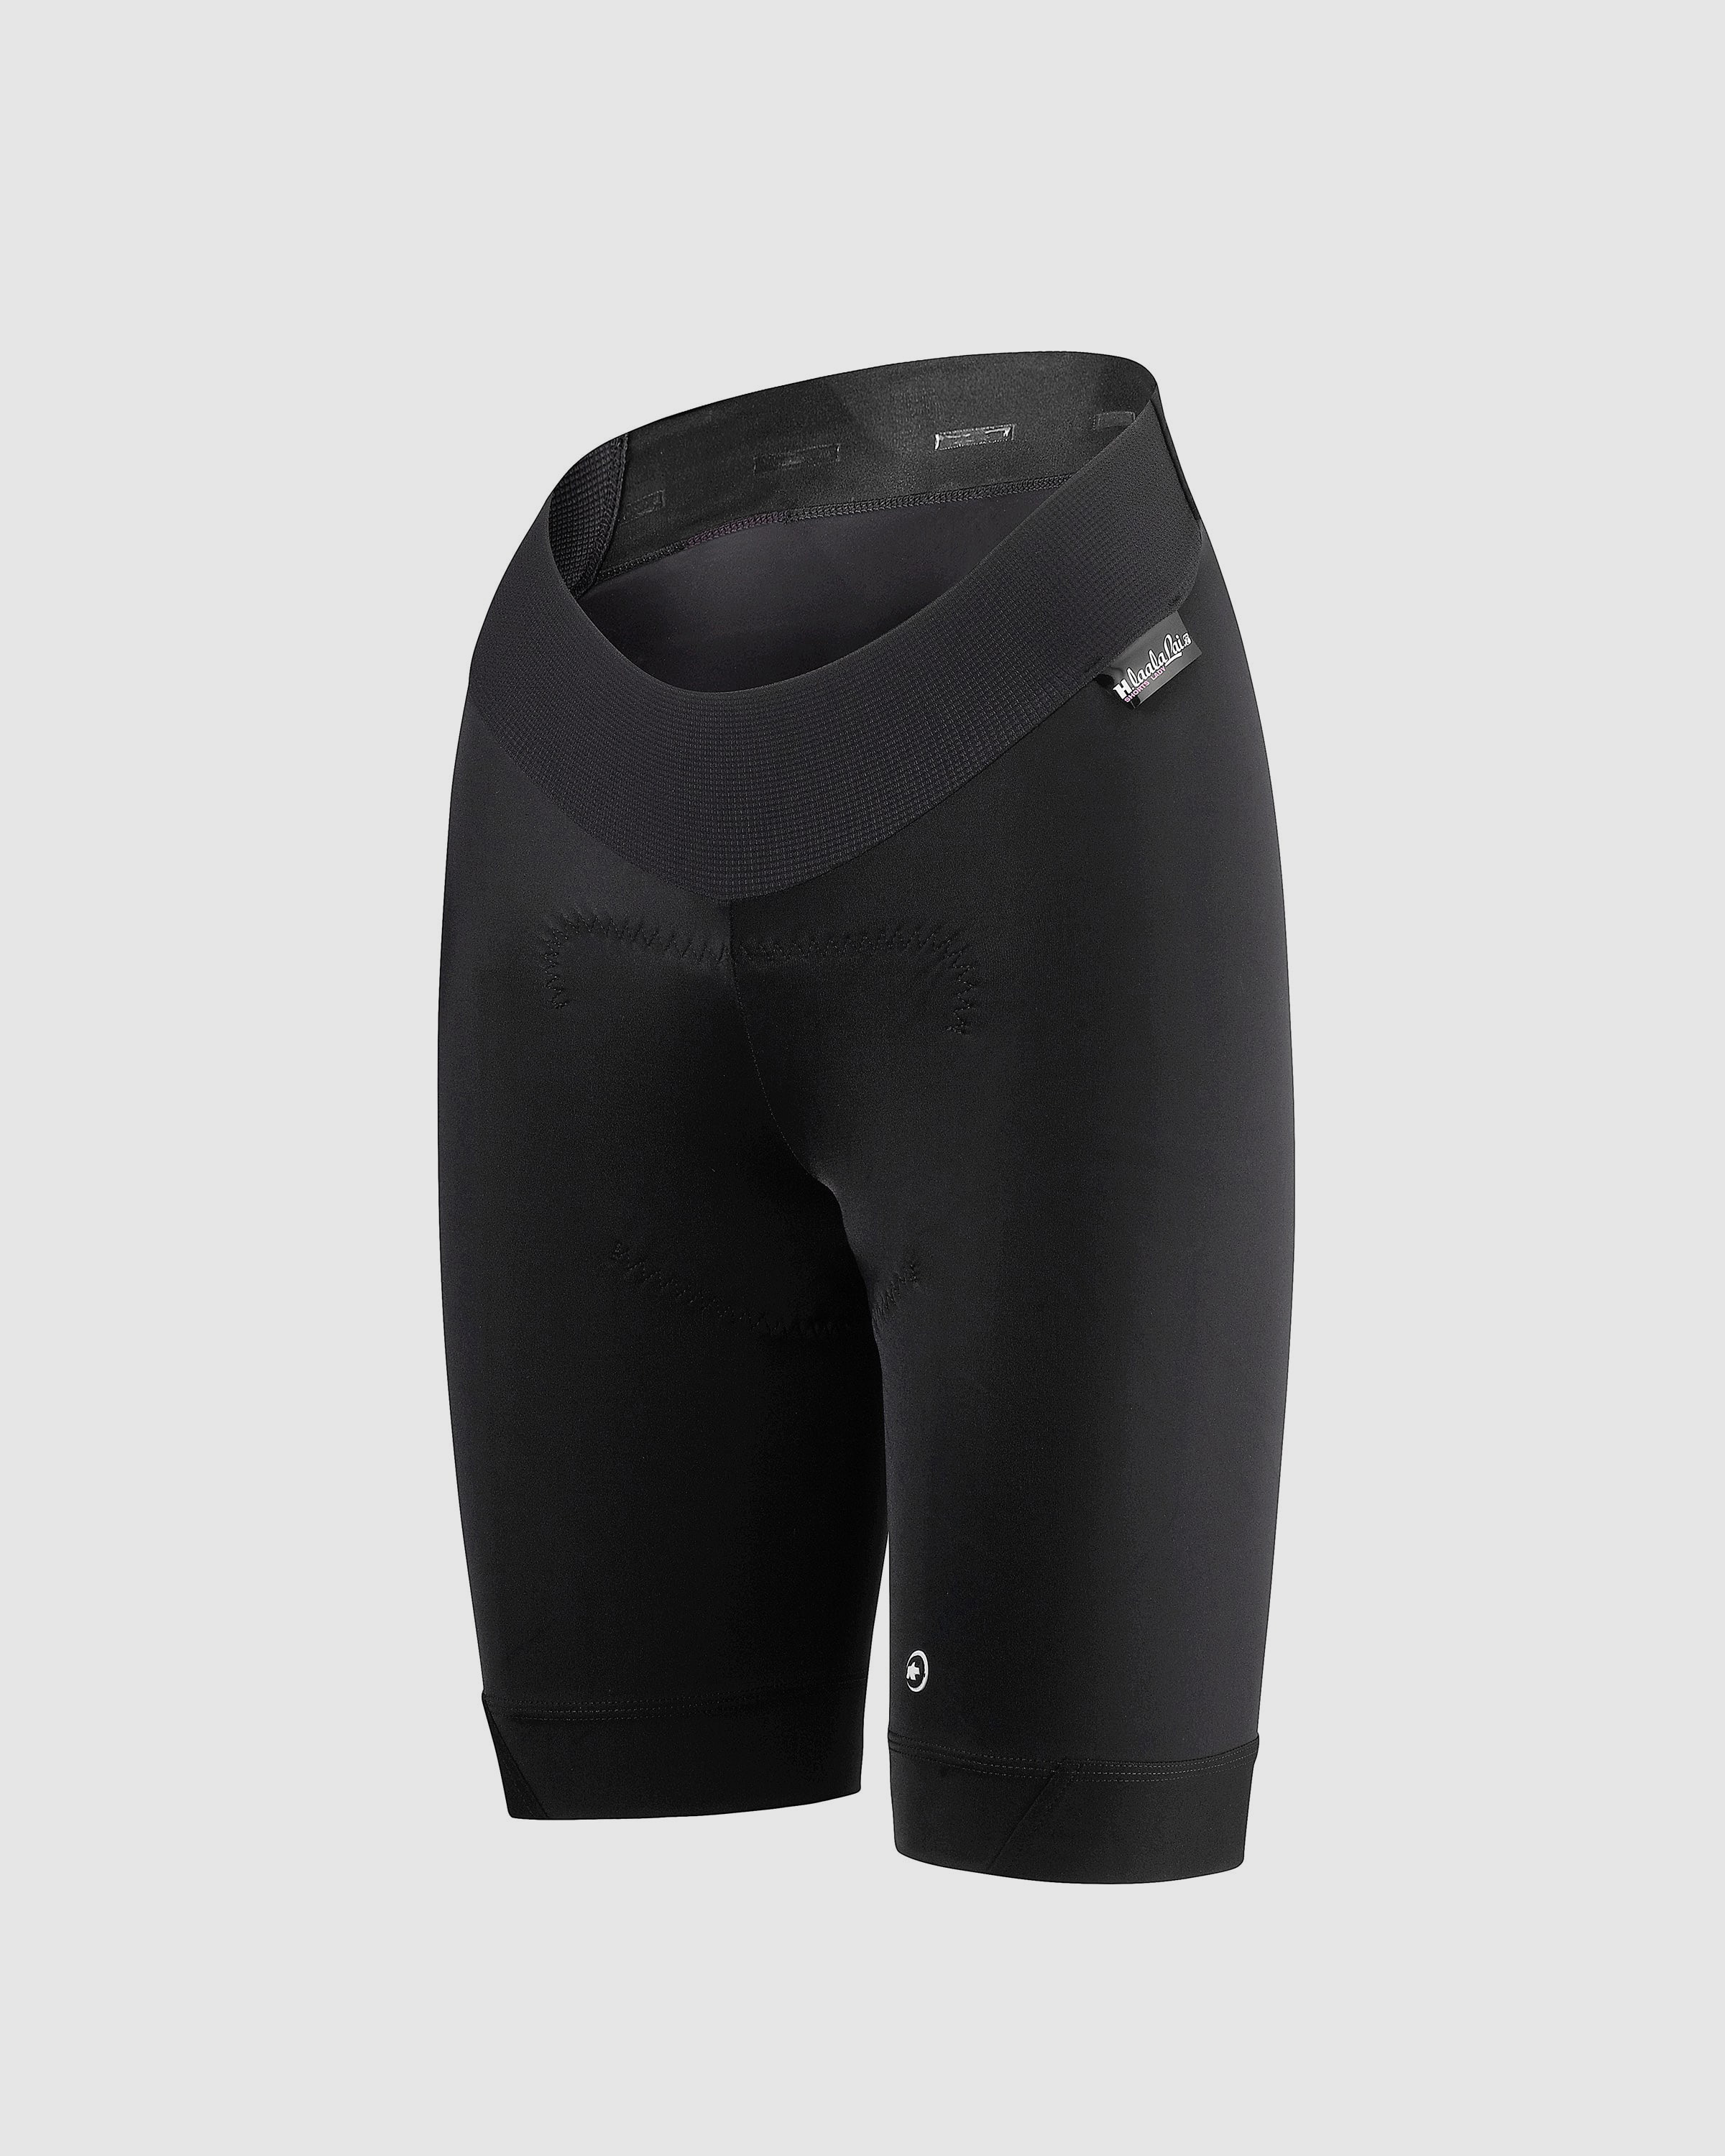 H.laalalaiShorts_s7 - ASSOS Of Switzerland - Official Outlet